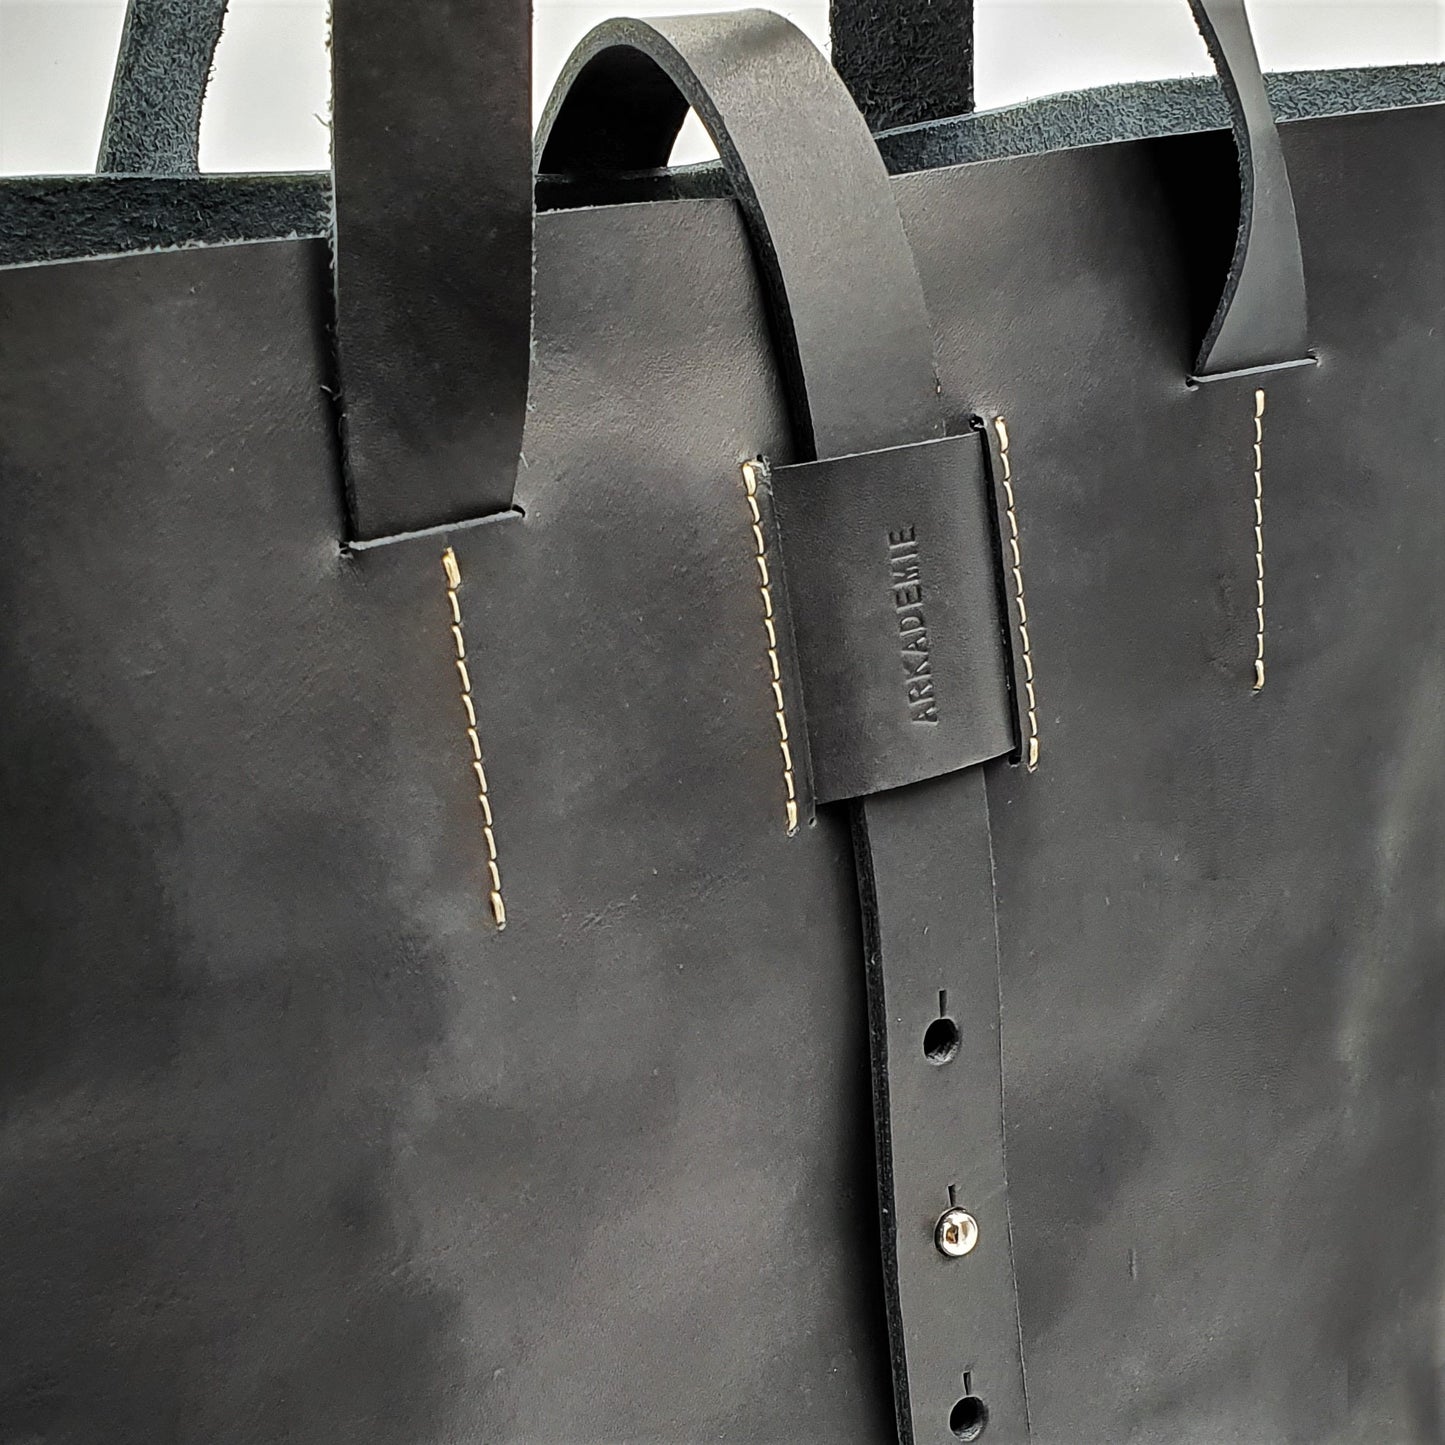 HERITAGE A3-L Leather Tote Bag